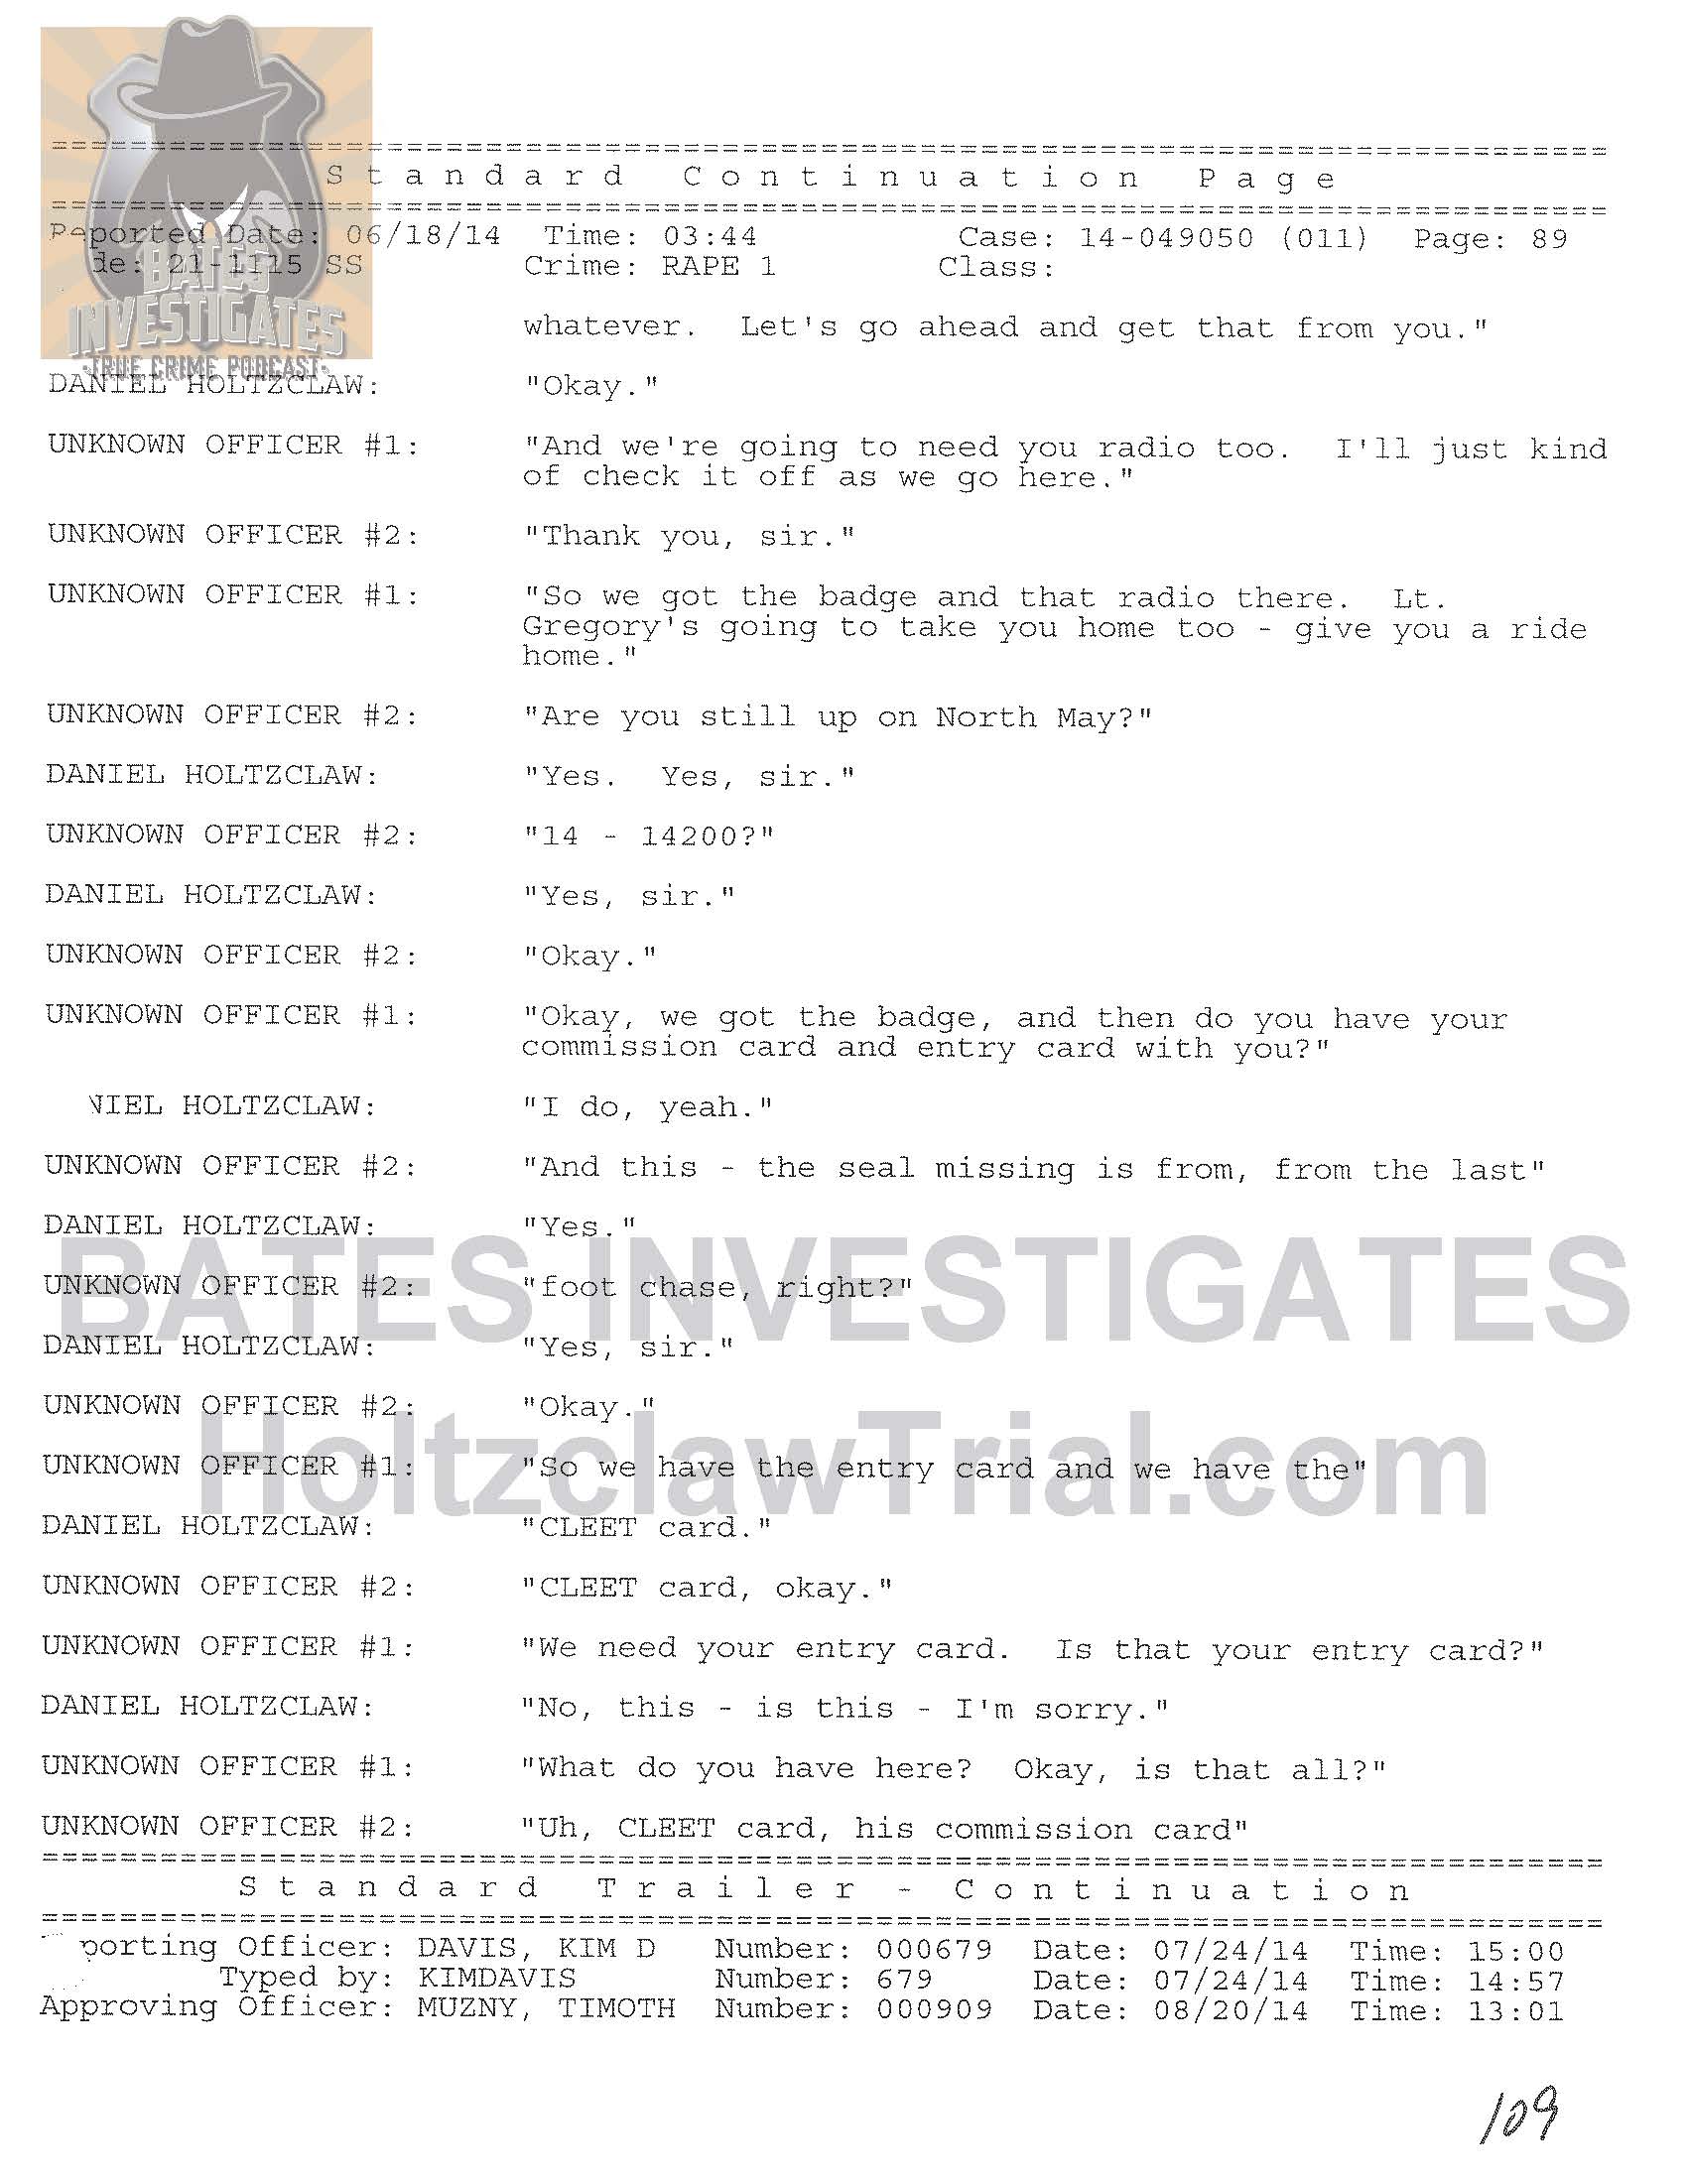 Holtzclaw Interrogation Transcript - Ep02 Redacted_Page_89.jpg